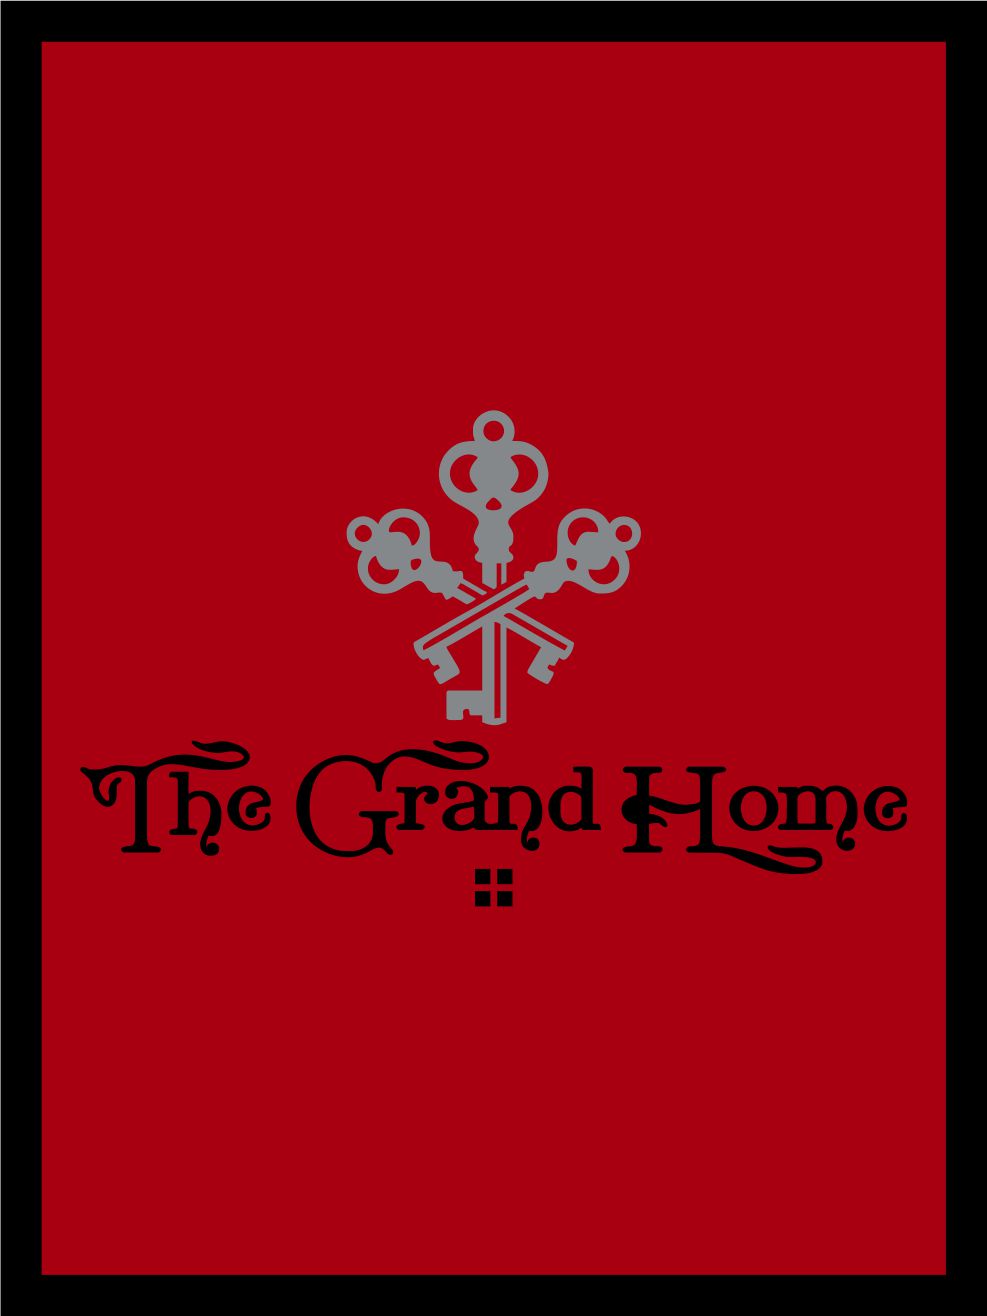 The Grand Home